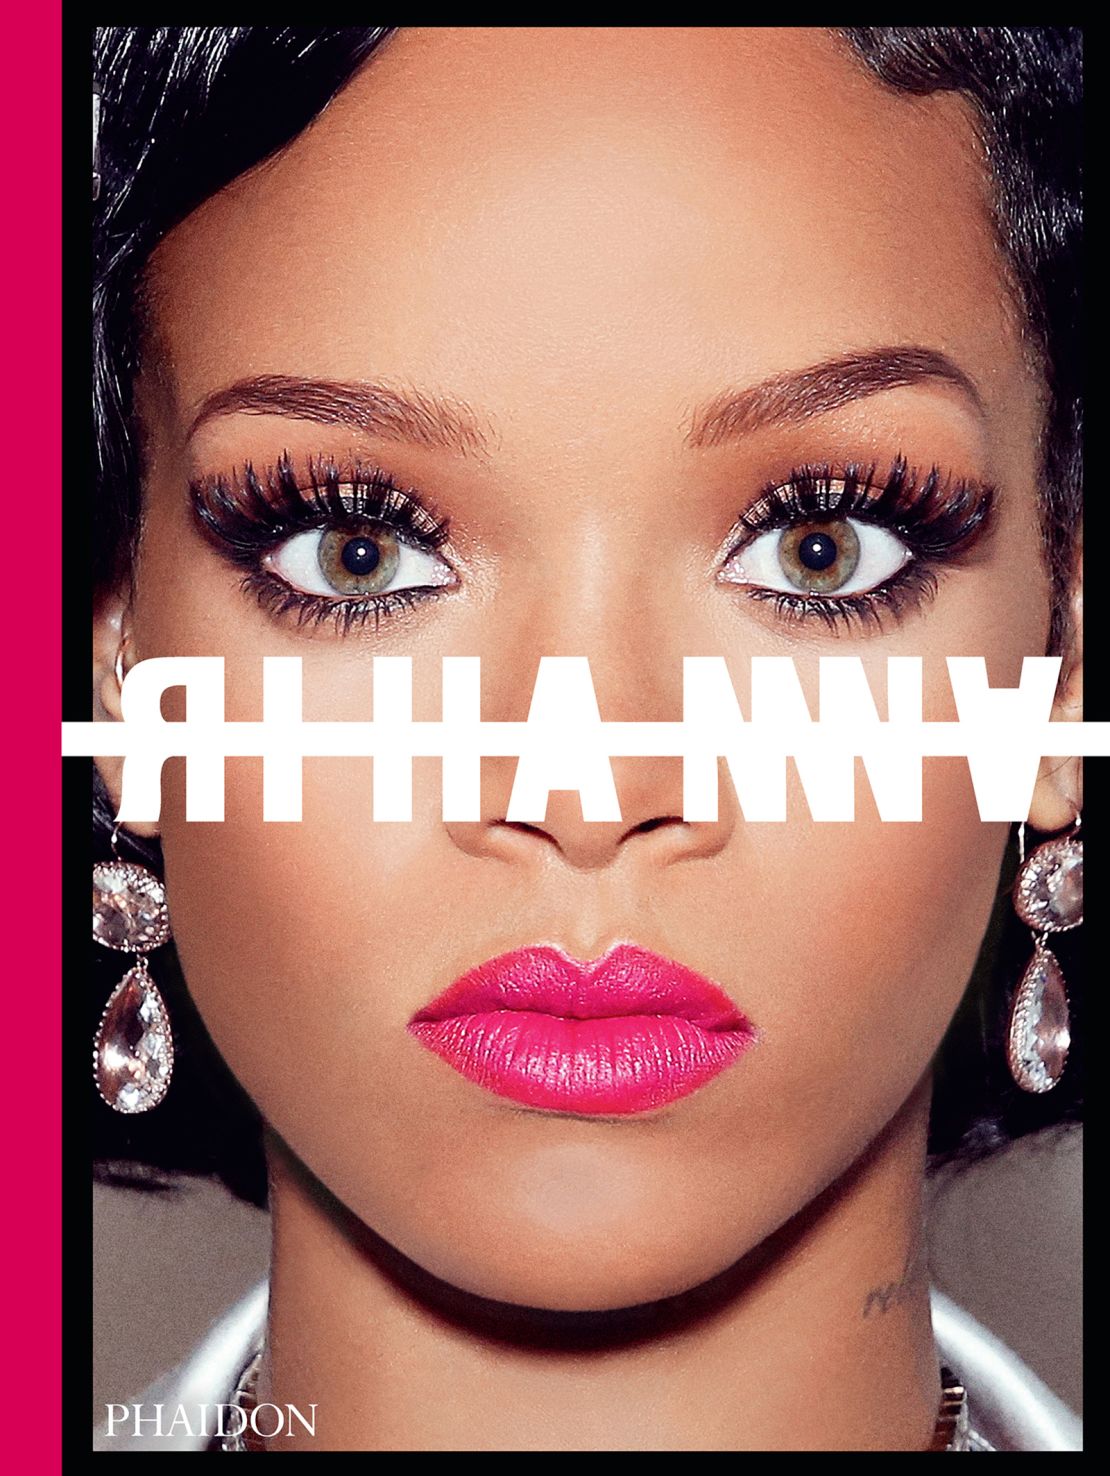 The cover of Rihanna's "visual autobiography," officially published by Phaidon on October 24.